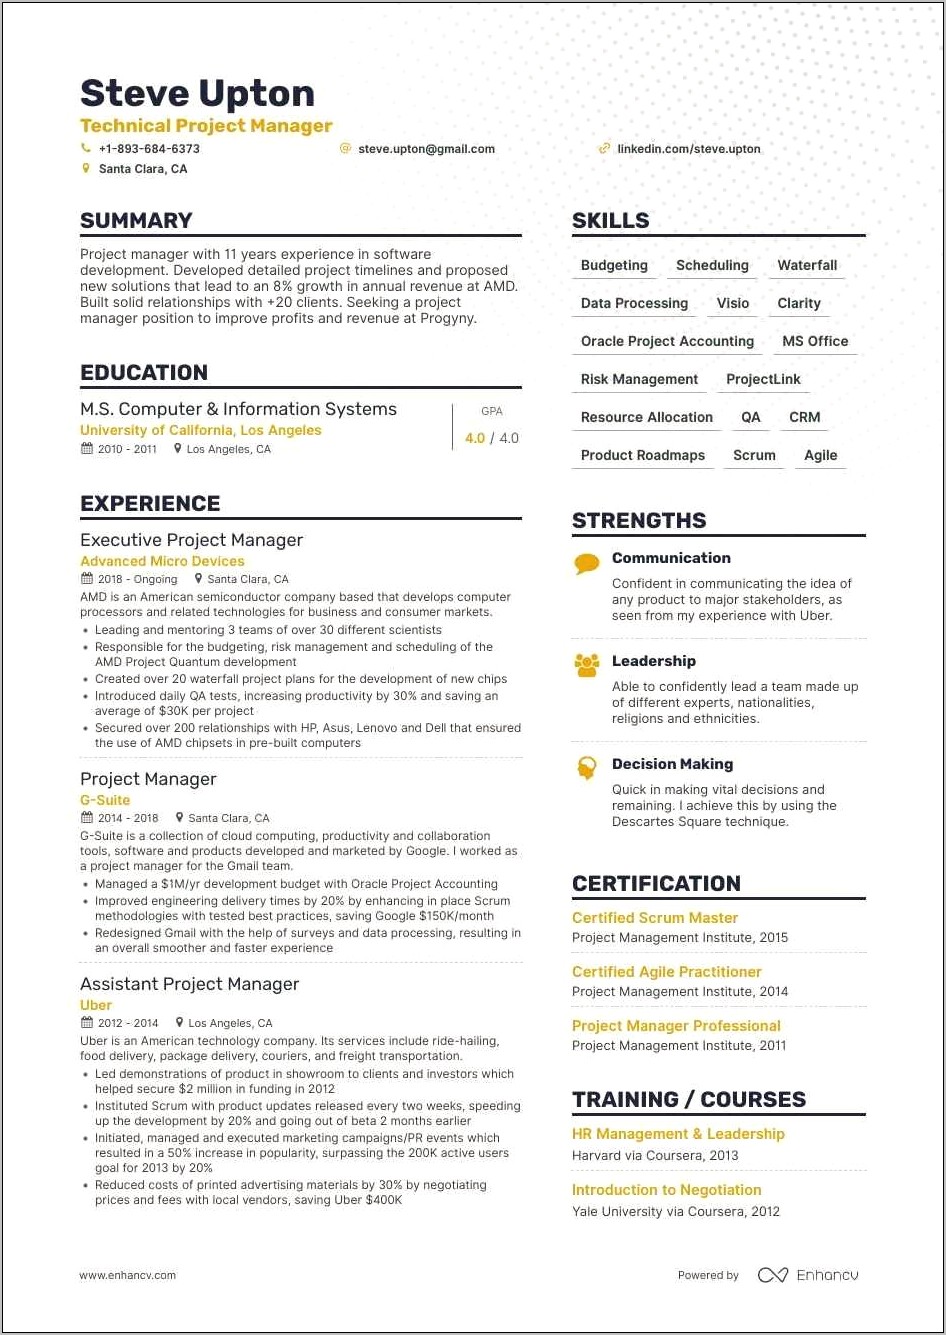 Resume Example For High Level Contrustion Manager